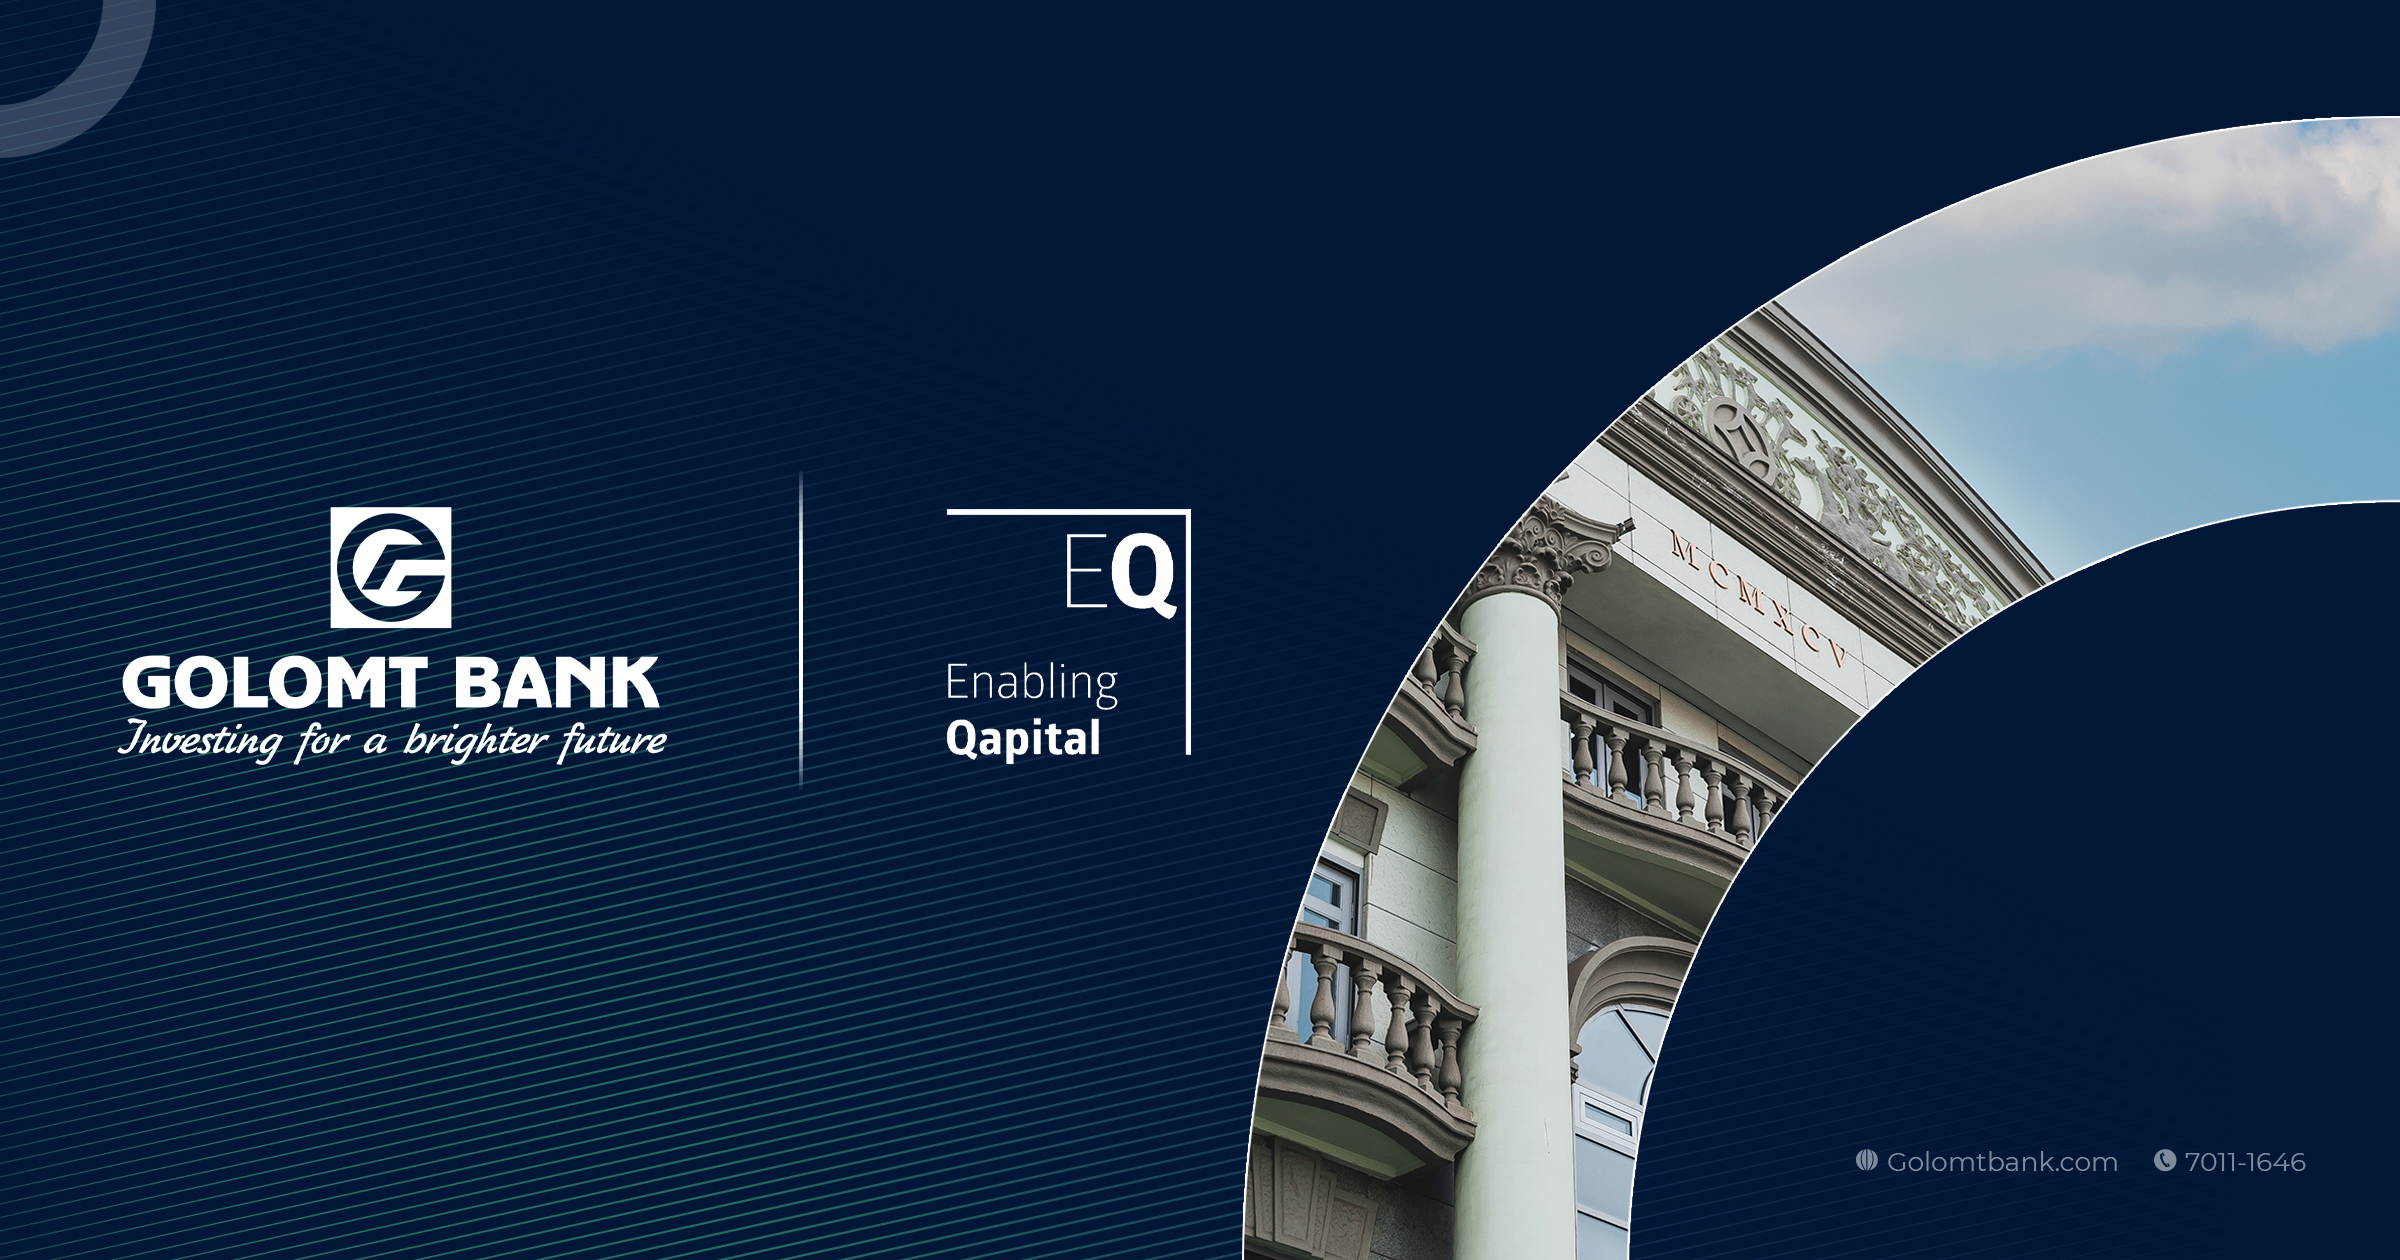 Golomt Bank successfully completed a fourth loan agreement with the “Enabling Qapital” Investment Fund